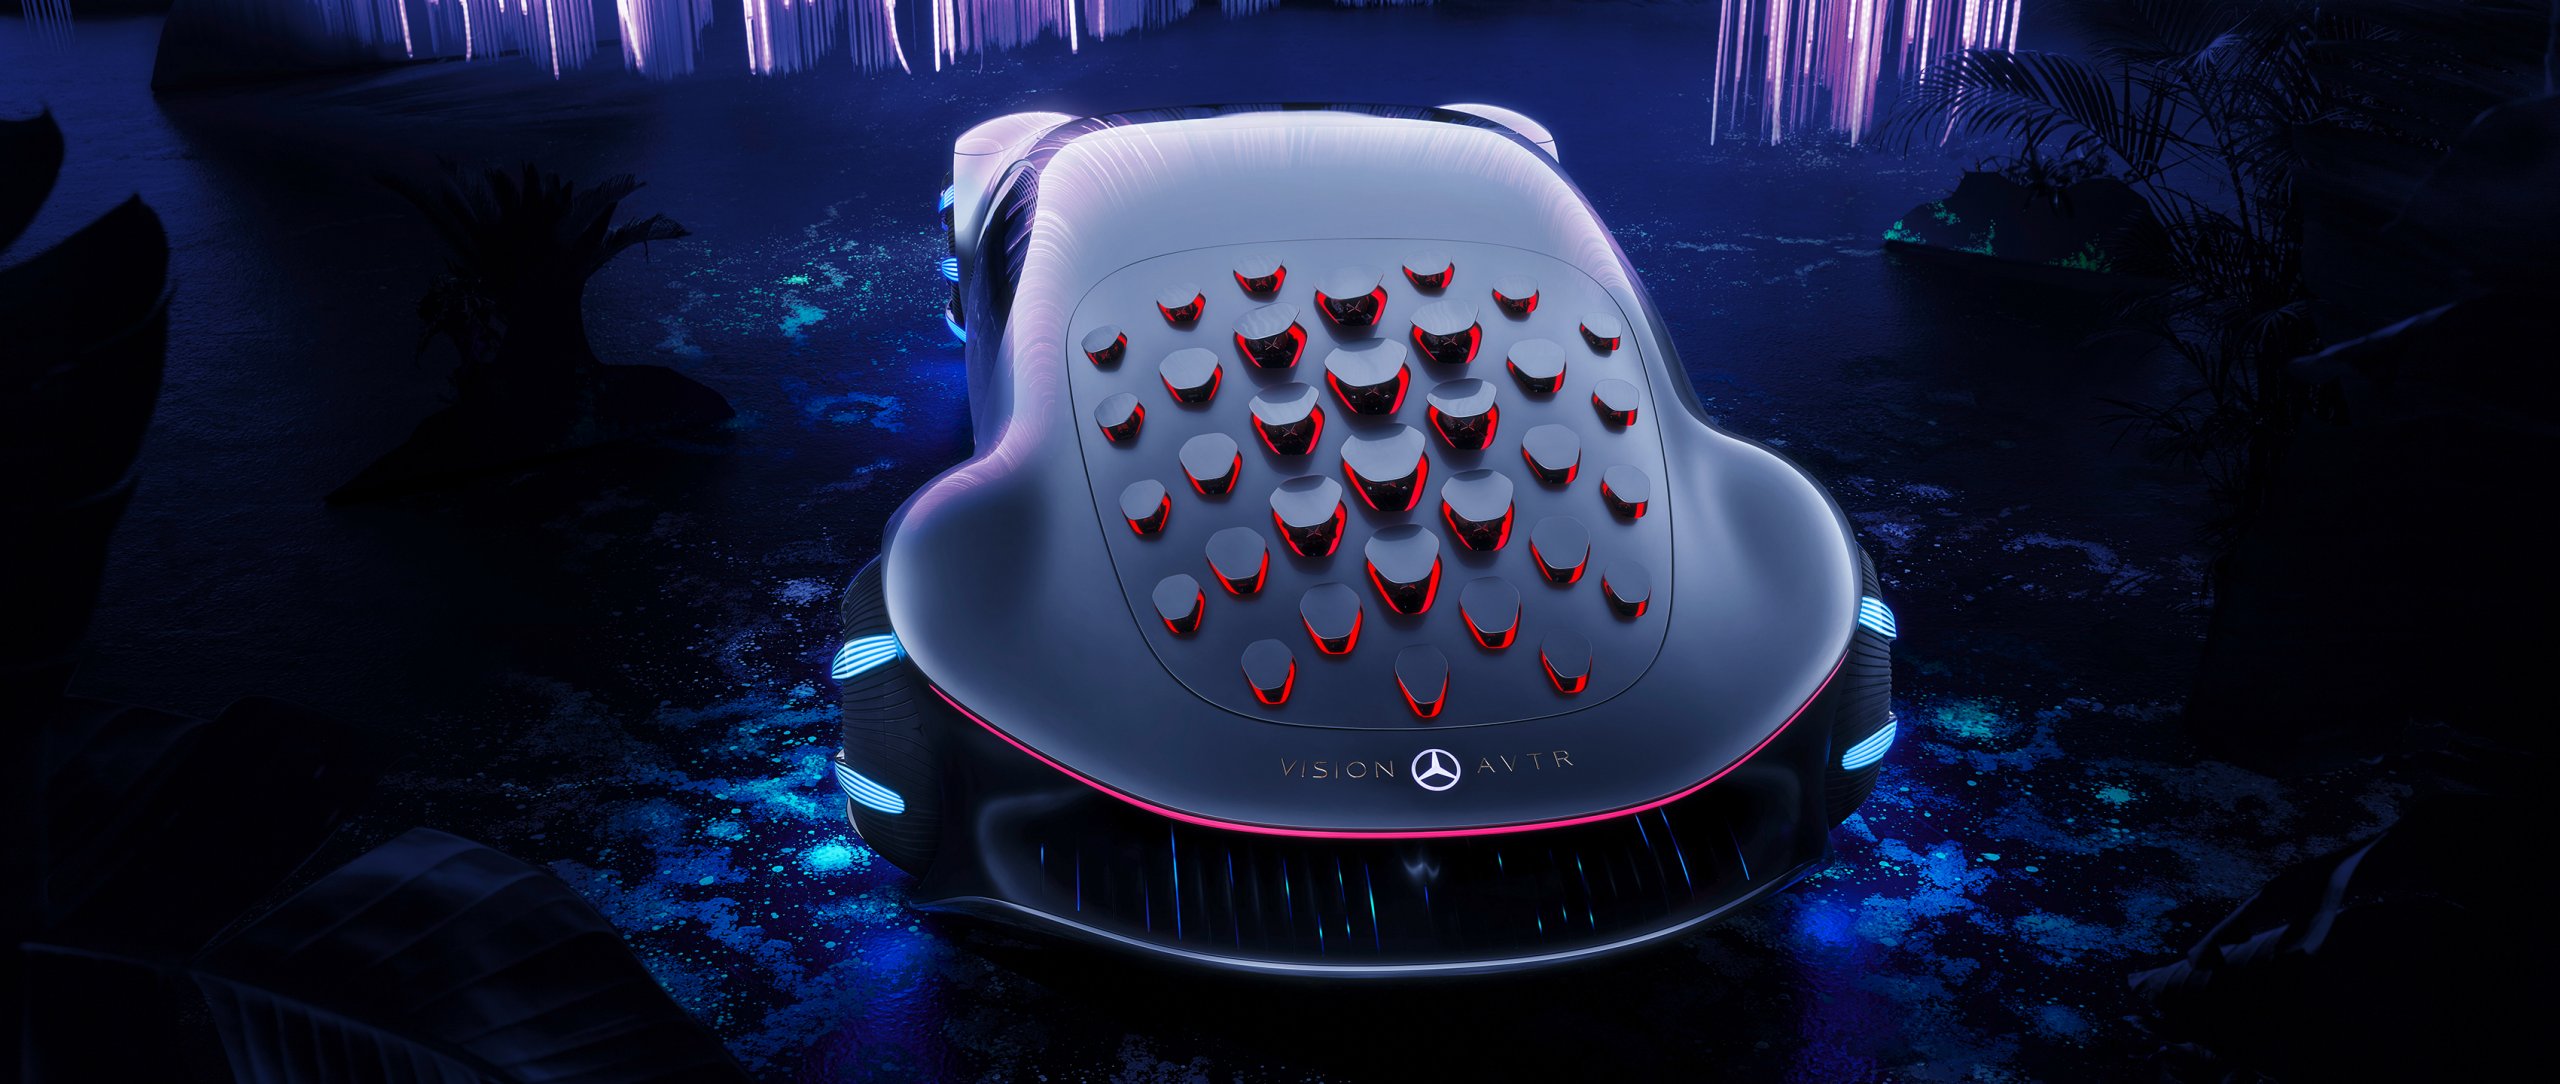 Rear view of the Mercedes-Benz VISION AVTR with red glowing solar plates on its back – inspired by AVATAR